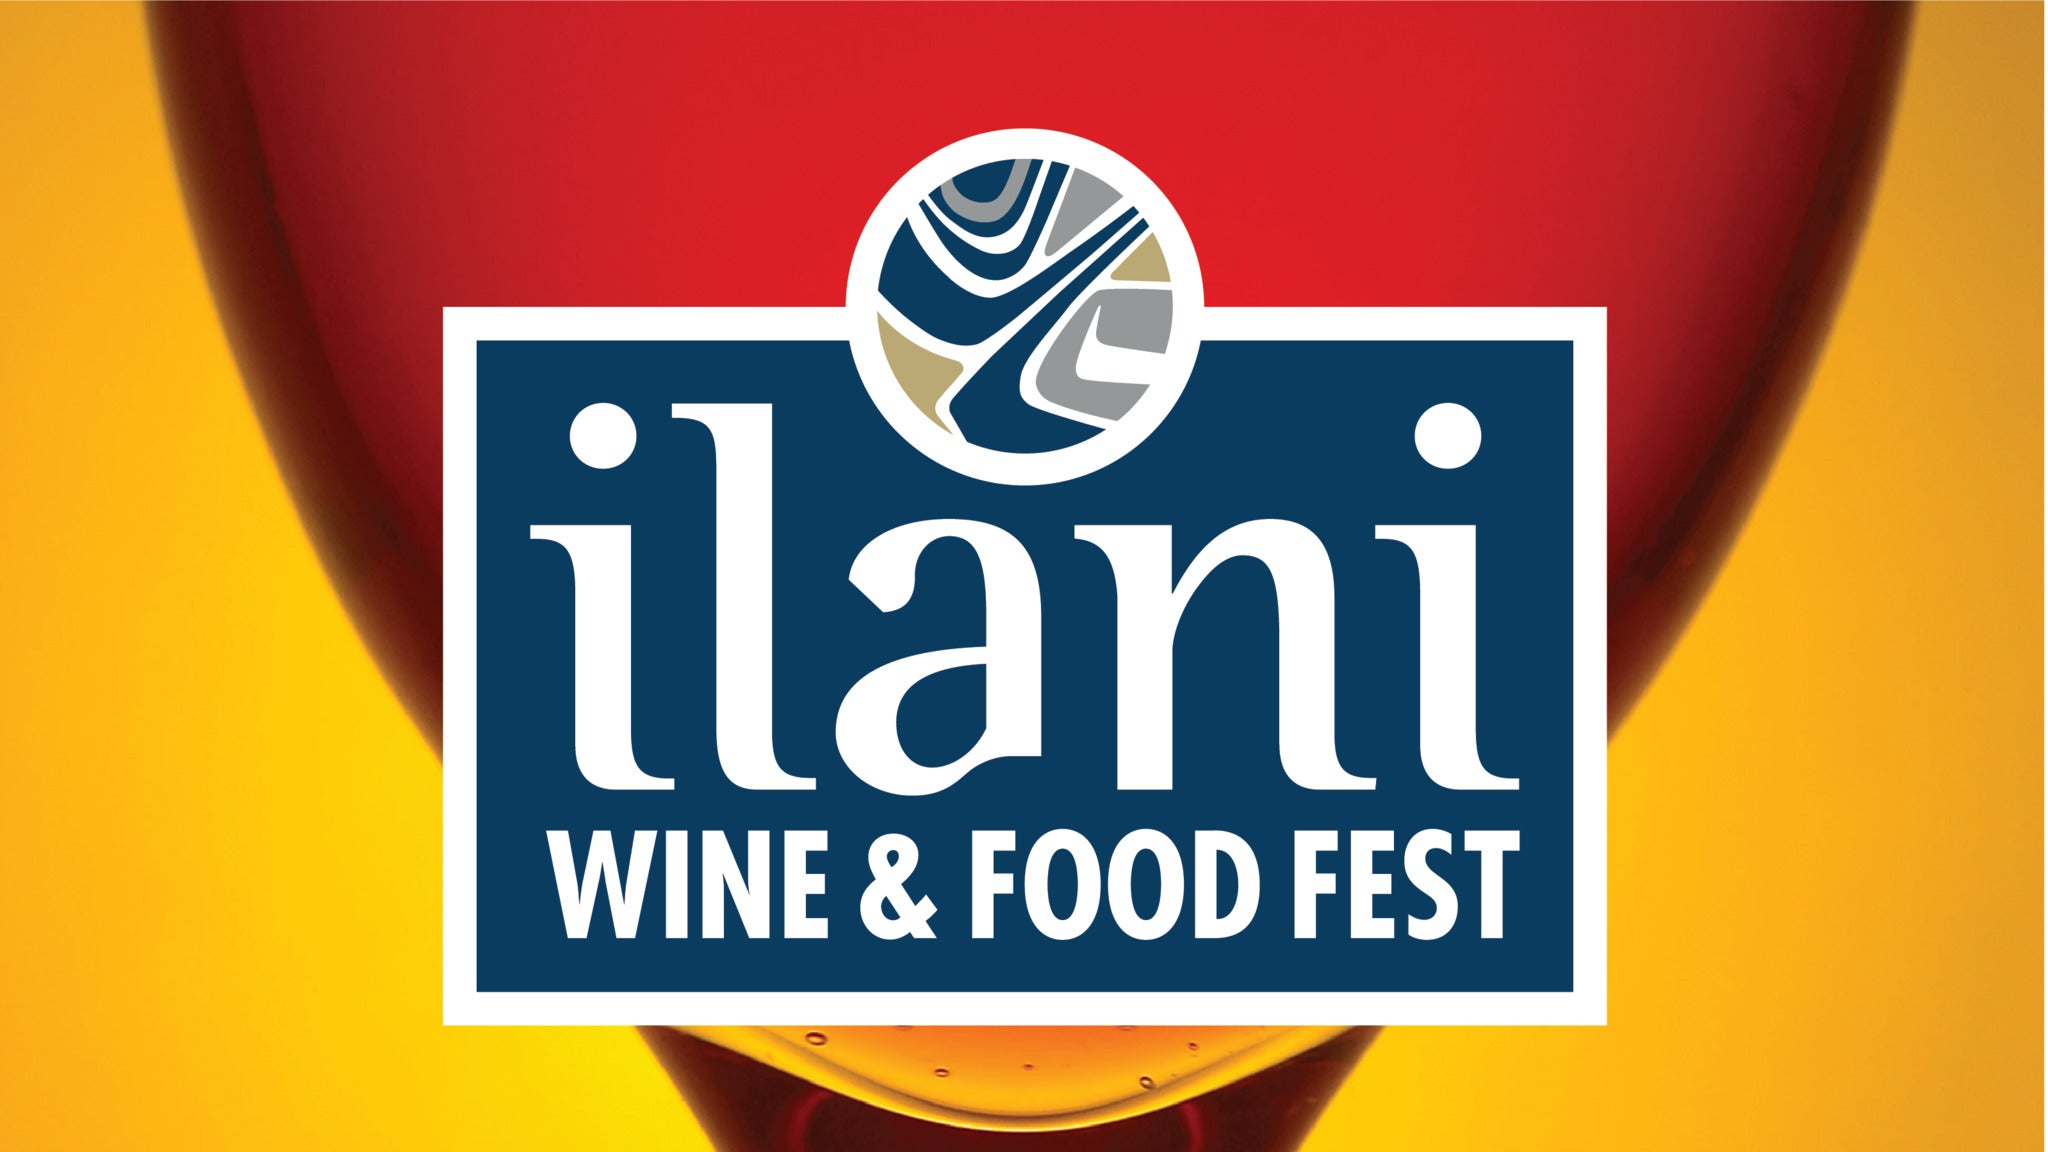 ilani Wine & Food Fest - 12pm Session Sunday Grand Tasting in Ridgefield promo photo for Early Bird presale offer code